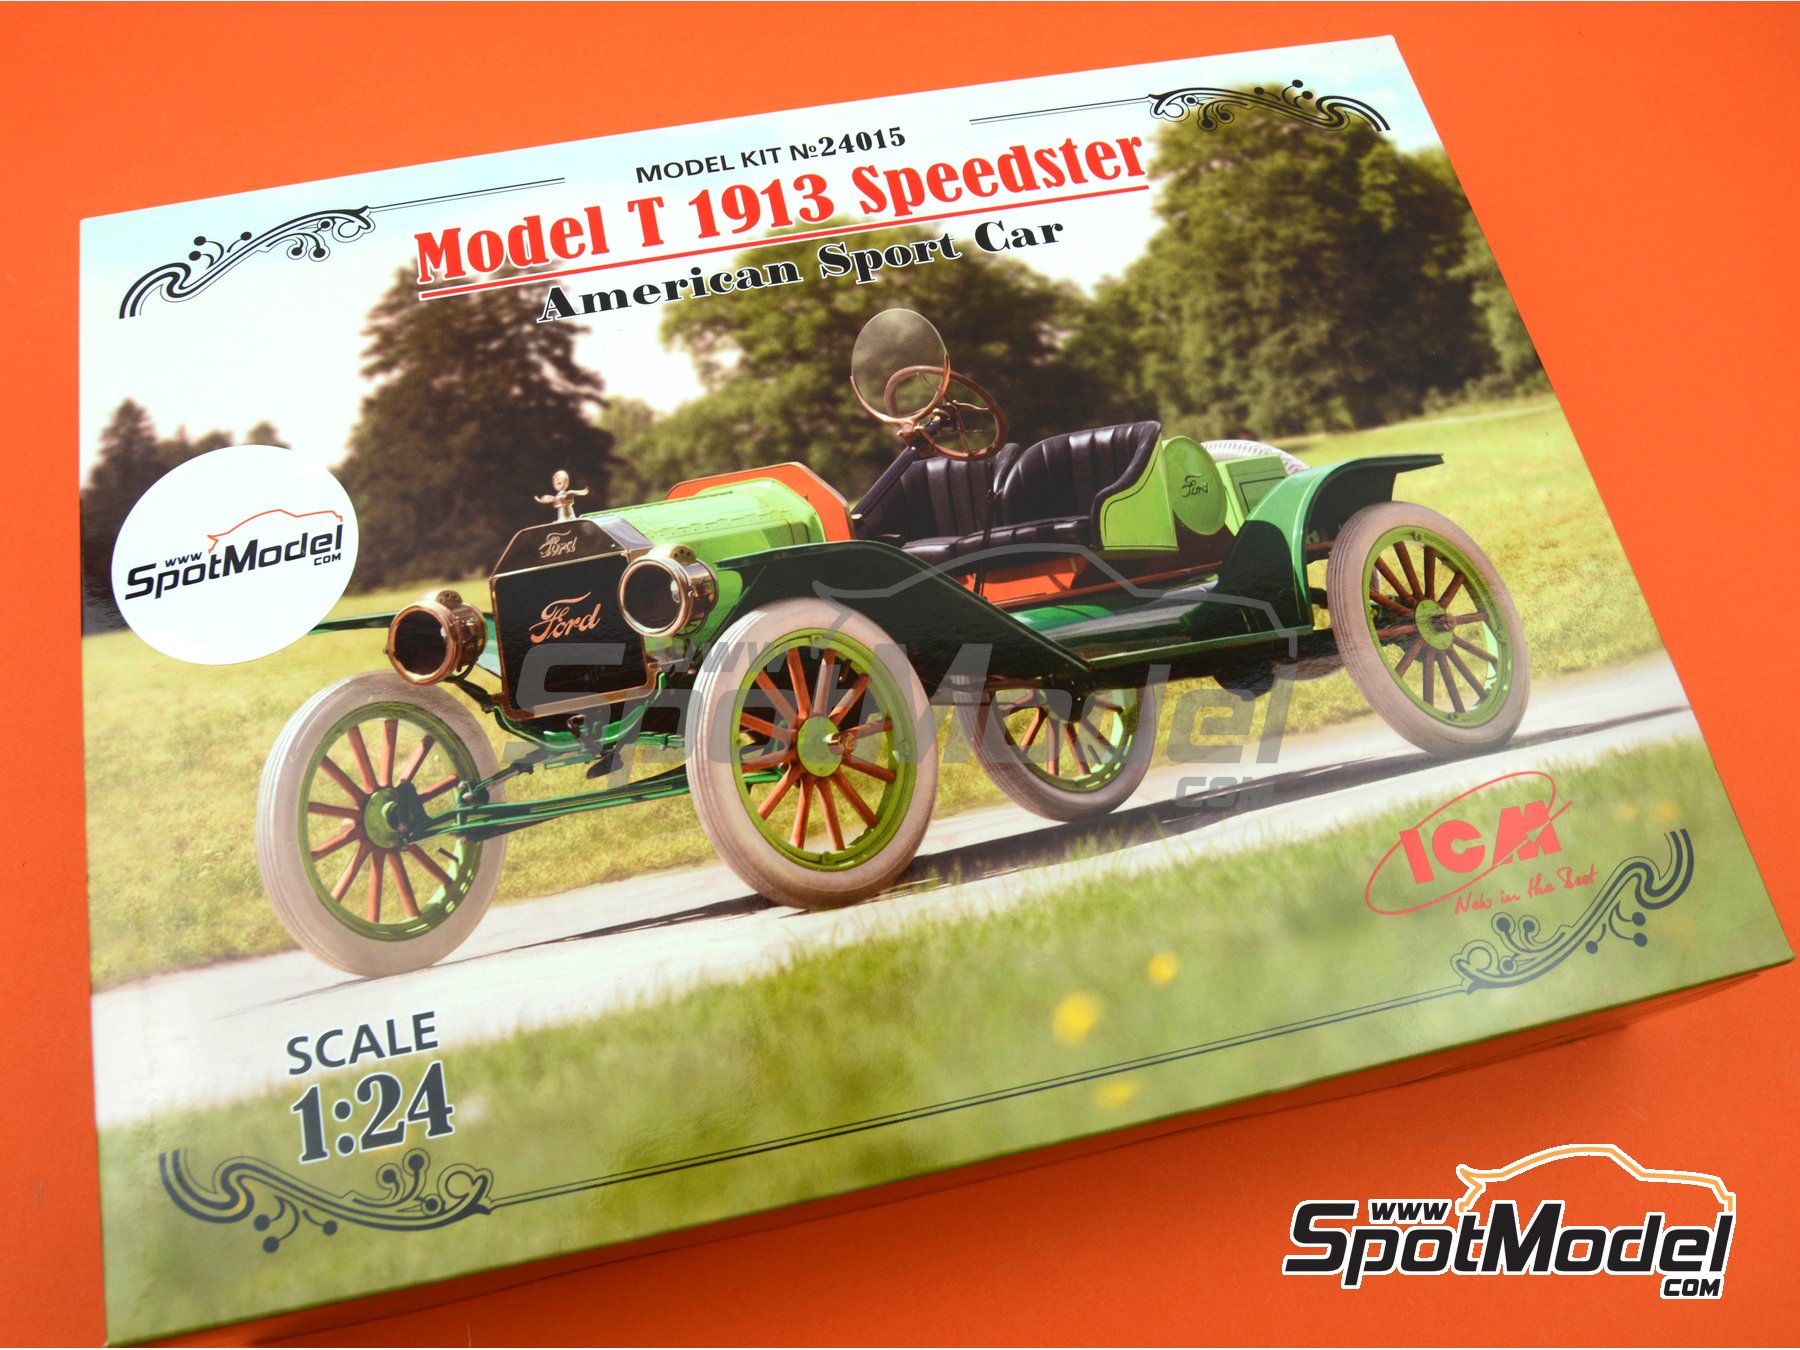 ICM 24015 1 24th Scale Ford Model T 1913 Speedster American Sport Car for sale online 